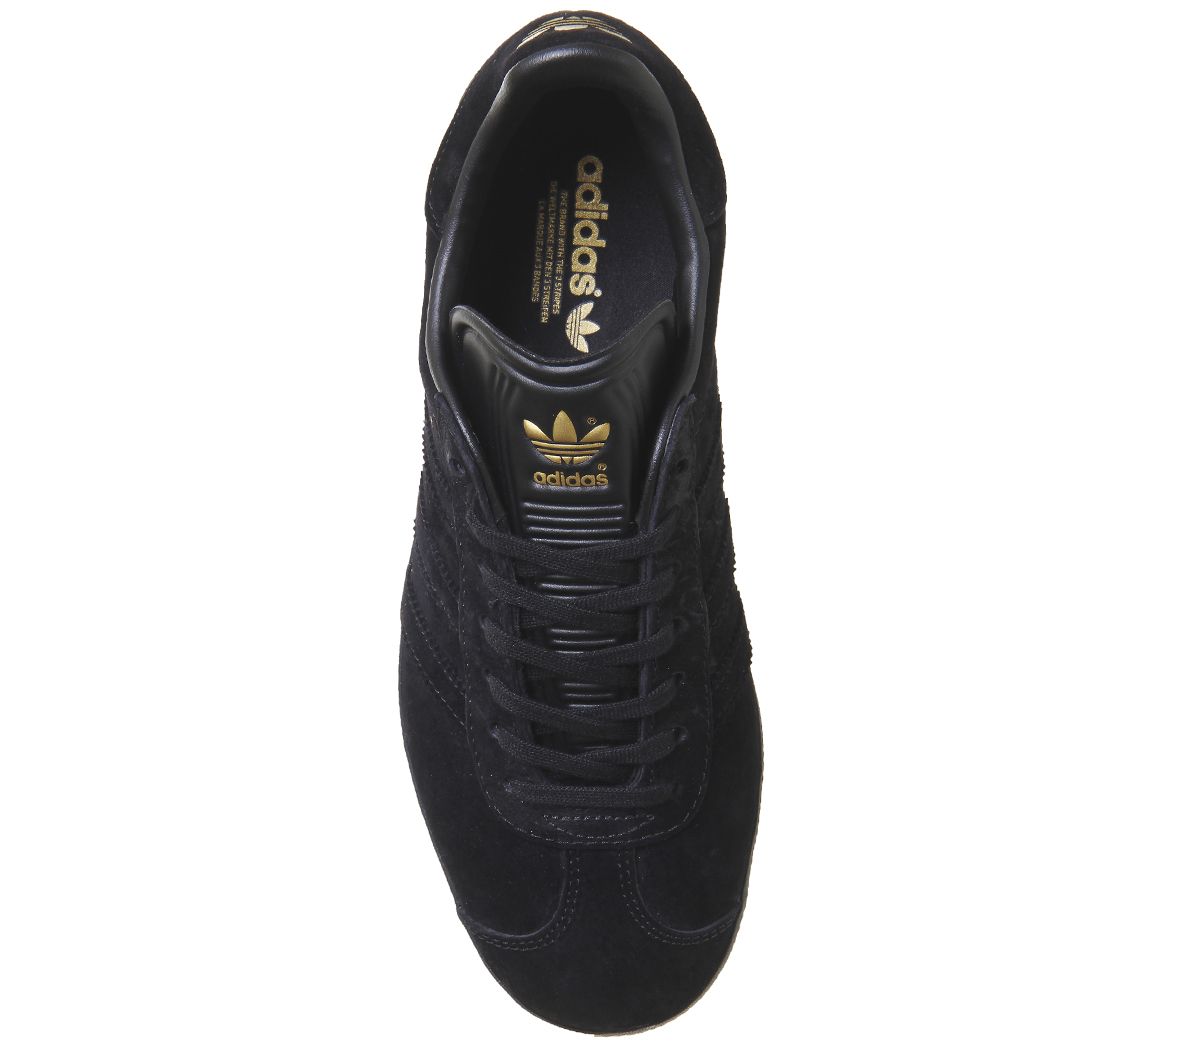 adidas Gazelle Trainers Black Gold Exclusive - His trainers